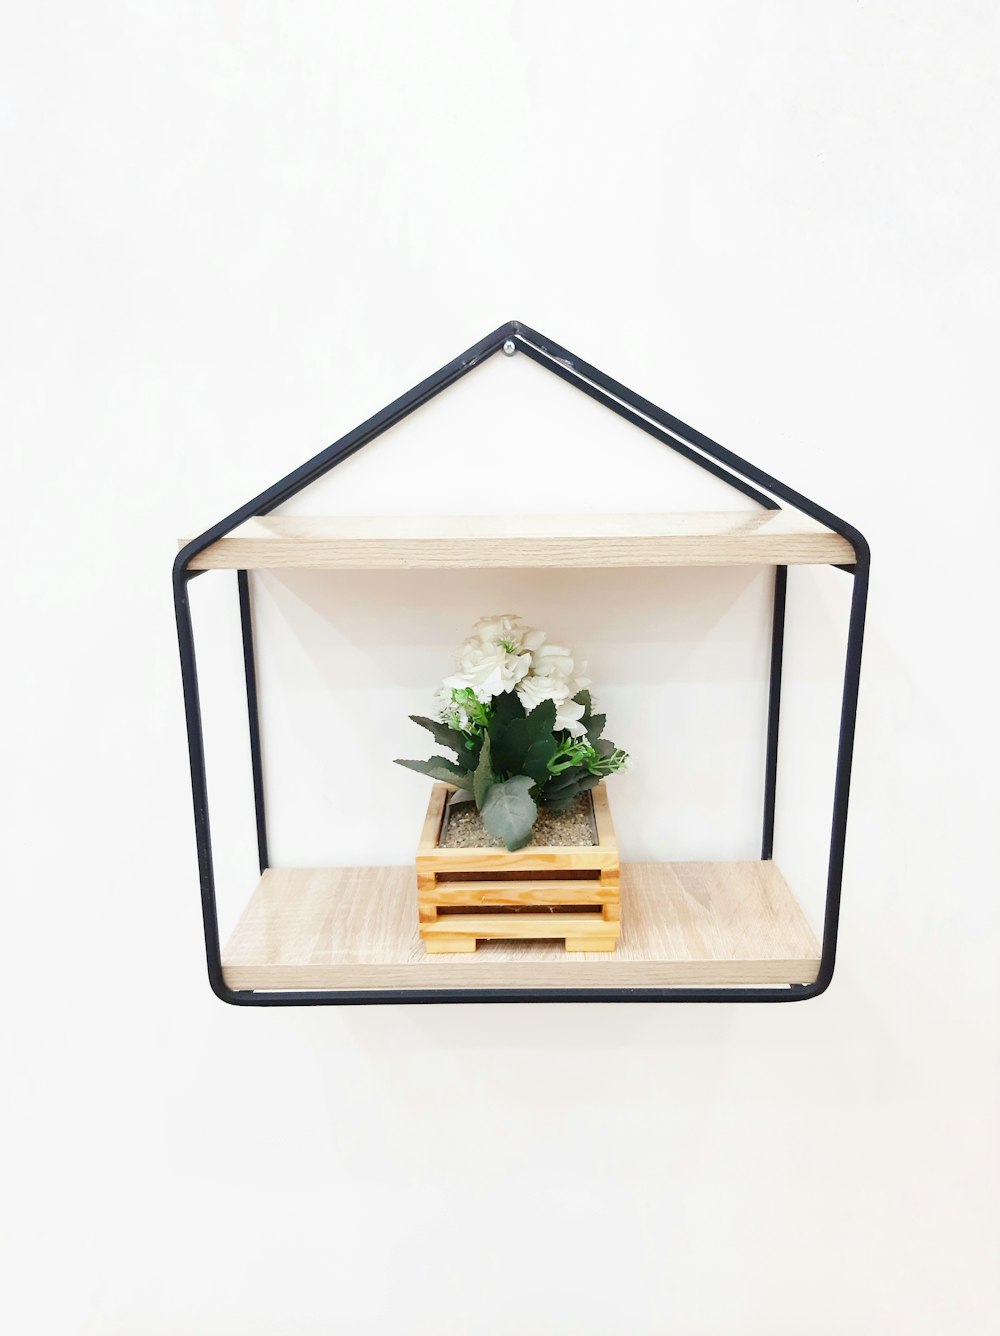 a wooden shelf with a potted plant in it